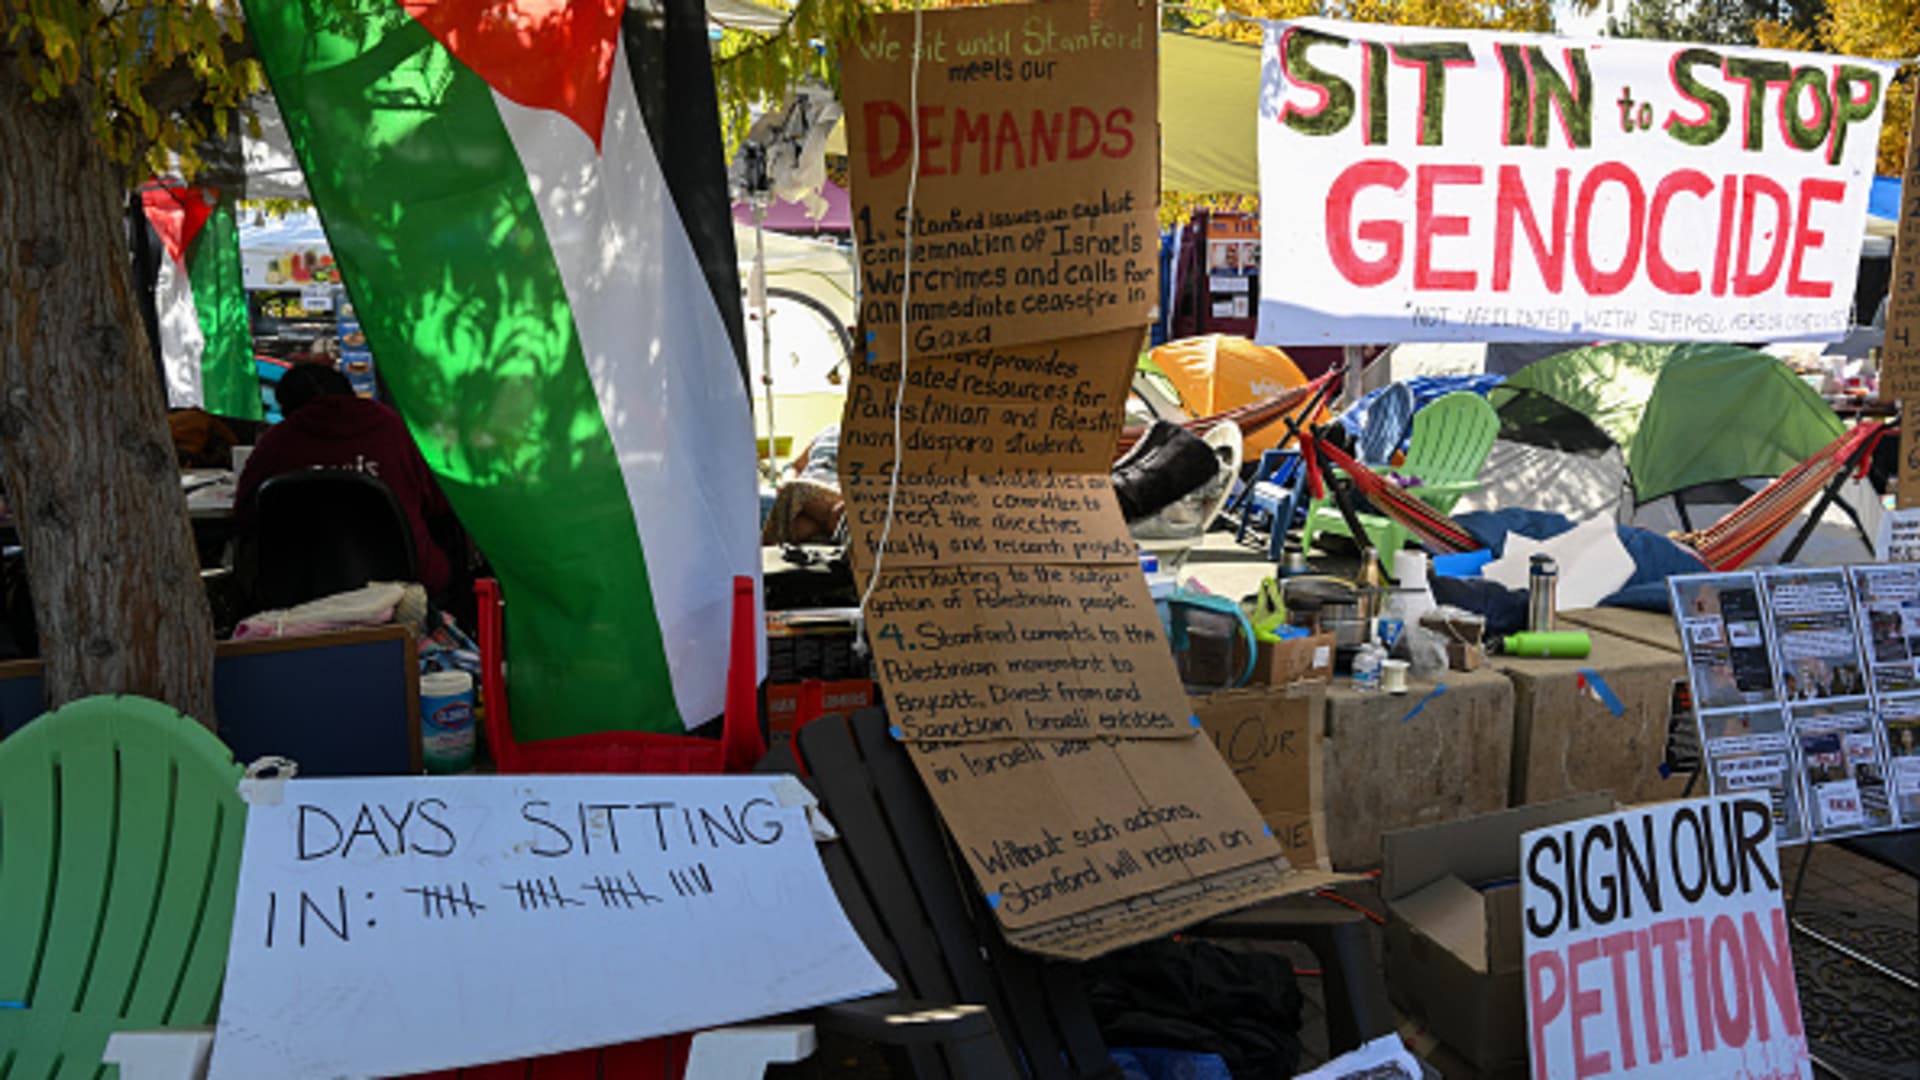 A view of encampment of students who have been sit-in on campus for 19 days at any given time and say they plan to do so until the university meets their demands, calling for the university to condemn Israeli attacks on Gaza, at White Plaza of Stanford University in Stanford, California, United States on November 7, 2023.